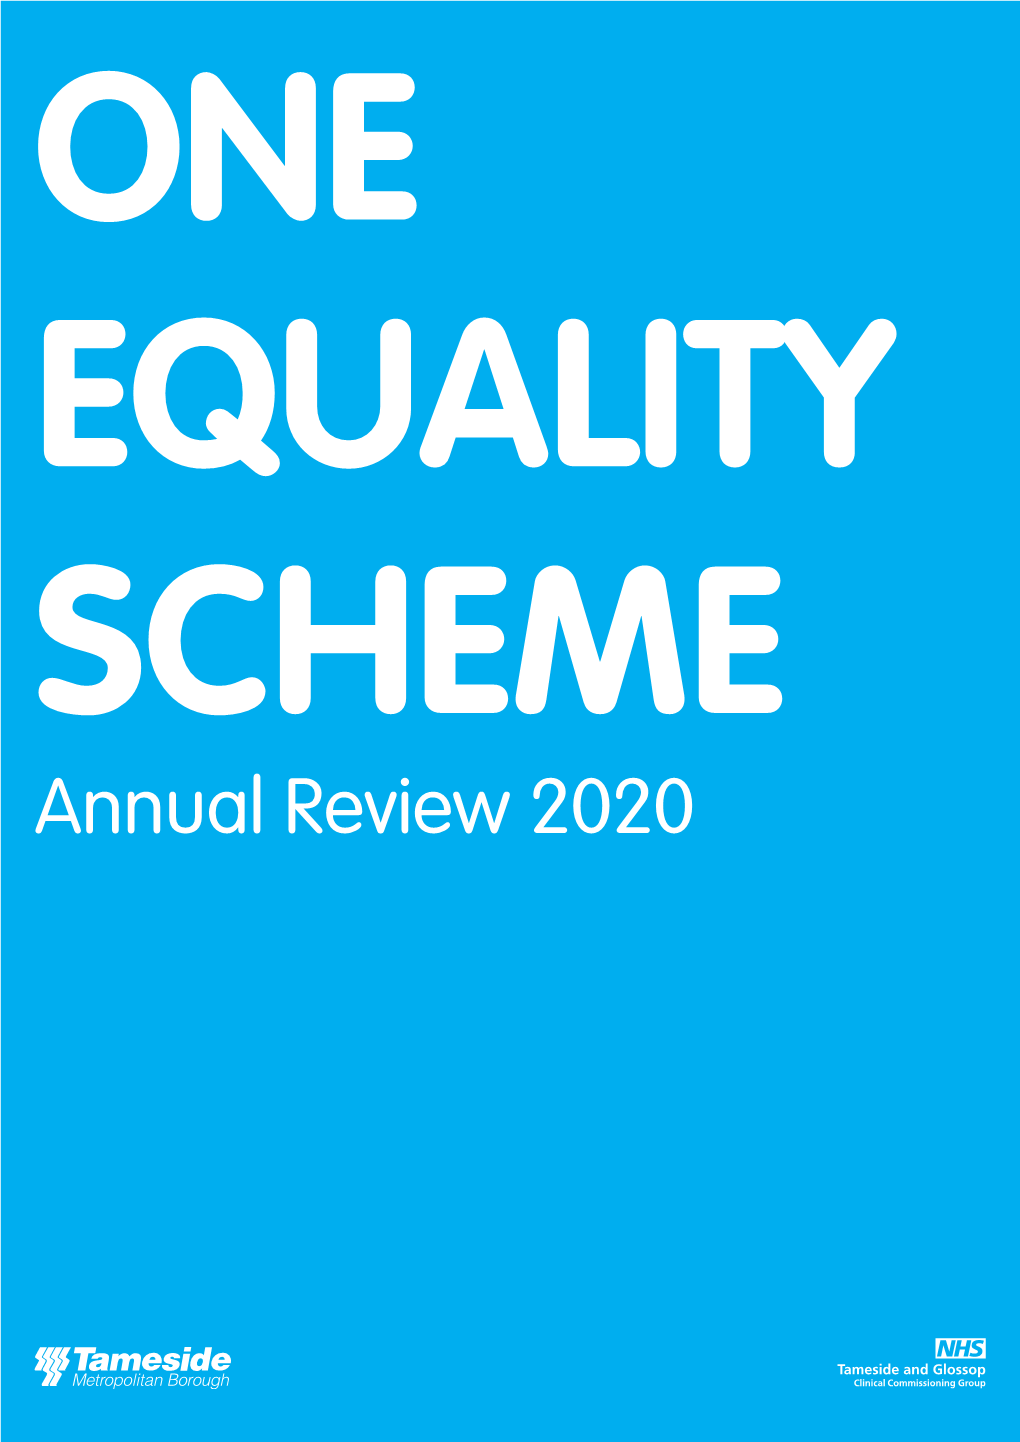 ONE EQUALITY SCHEME Annual Review 2020